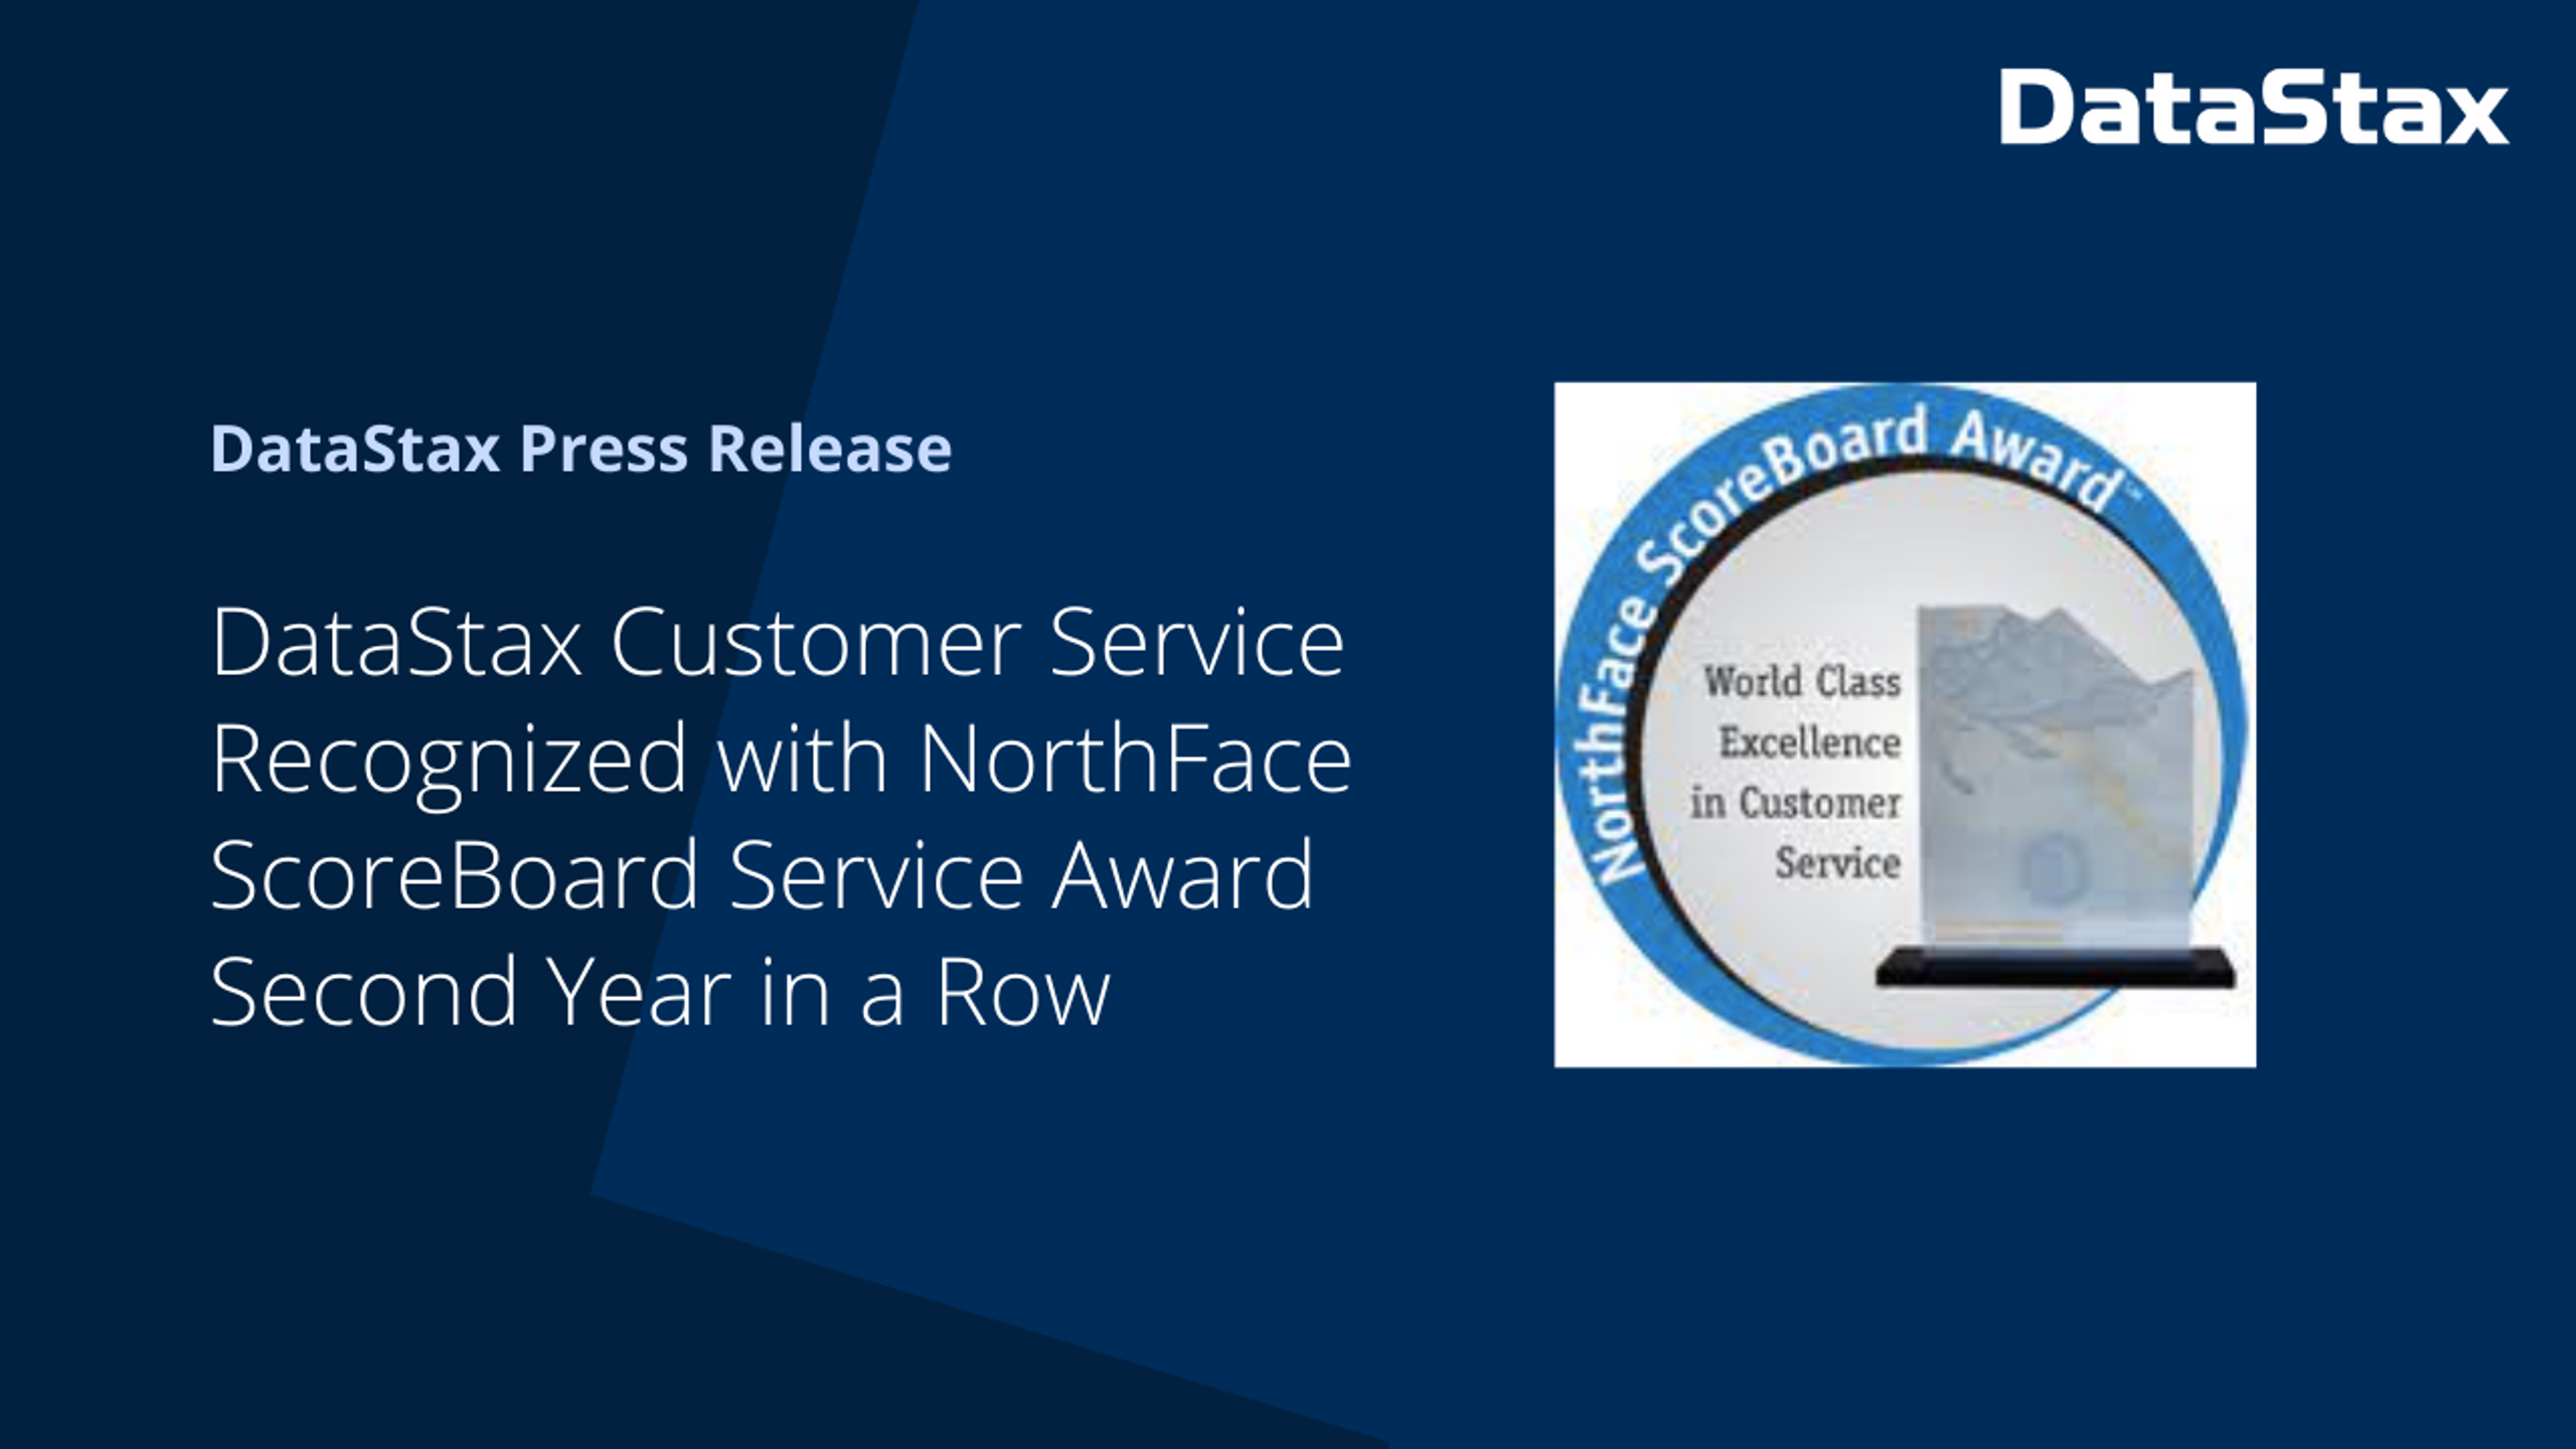 DataStax Customer Service Recognized with NorthFace ScoreBoard Service Award 2nd Year in a Row | DataStax